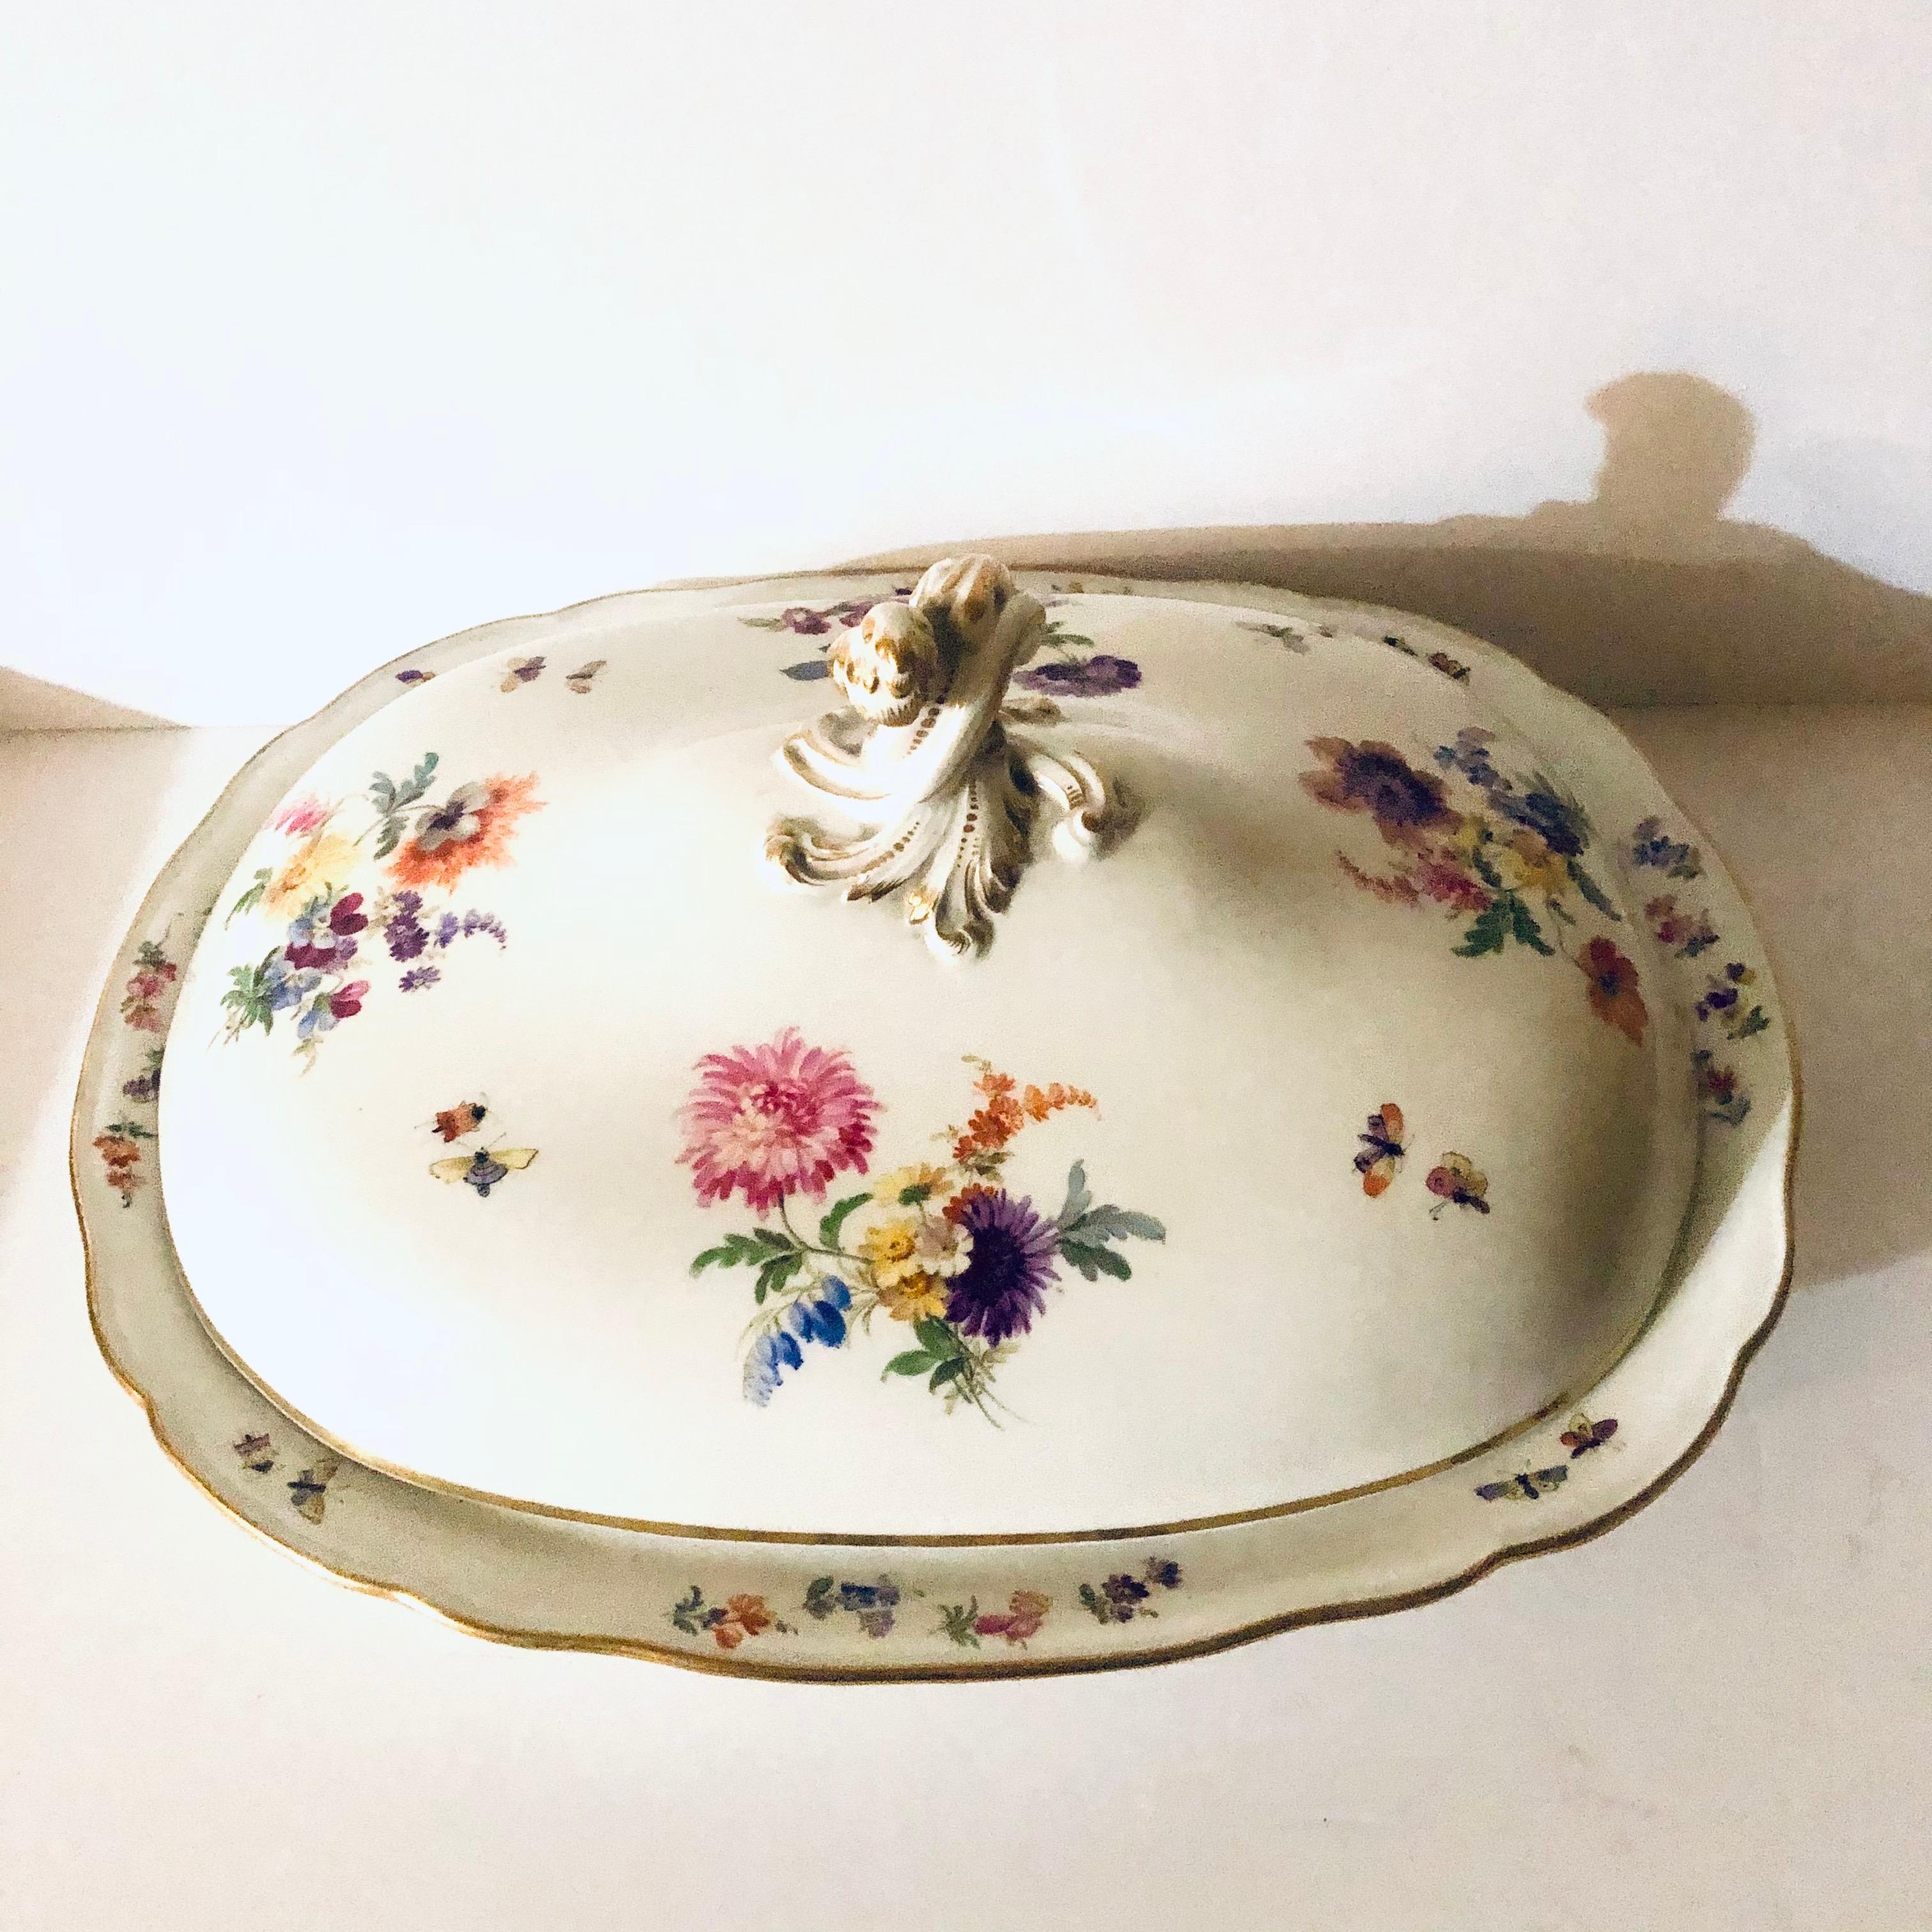 This is a fabulous large Meissen covered serving bowl in the New Brandenstein pattern with four beautiful different flower bouquets on top accented with whimsical insects. It was made in 1870s-1880s. The wonderful paintings of these flower bouquets